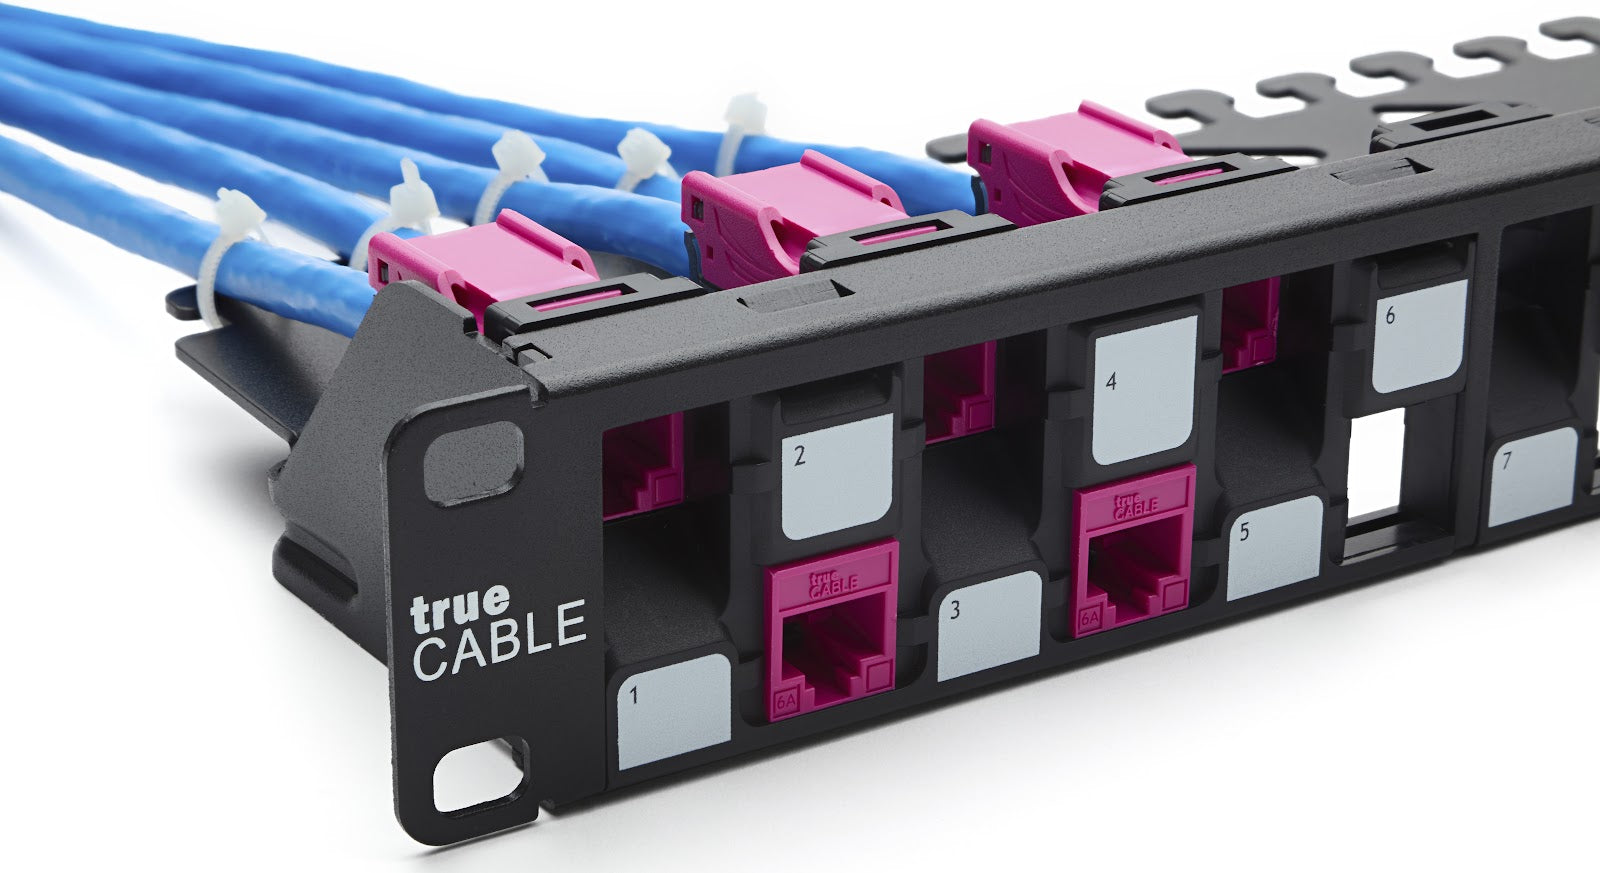 trueCABLE staggered patch panel with ethernet cables going into the back of it